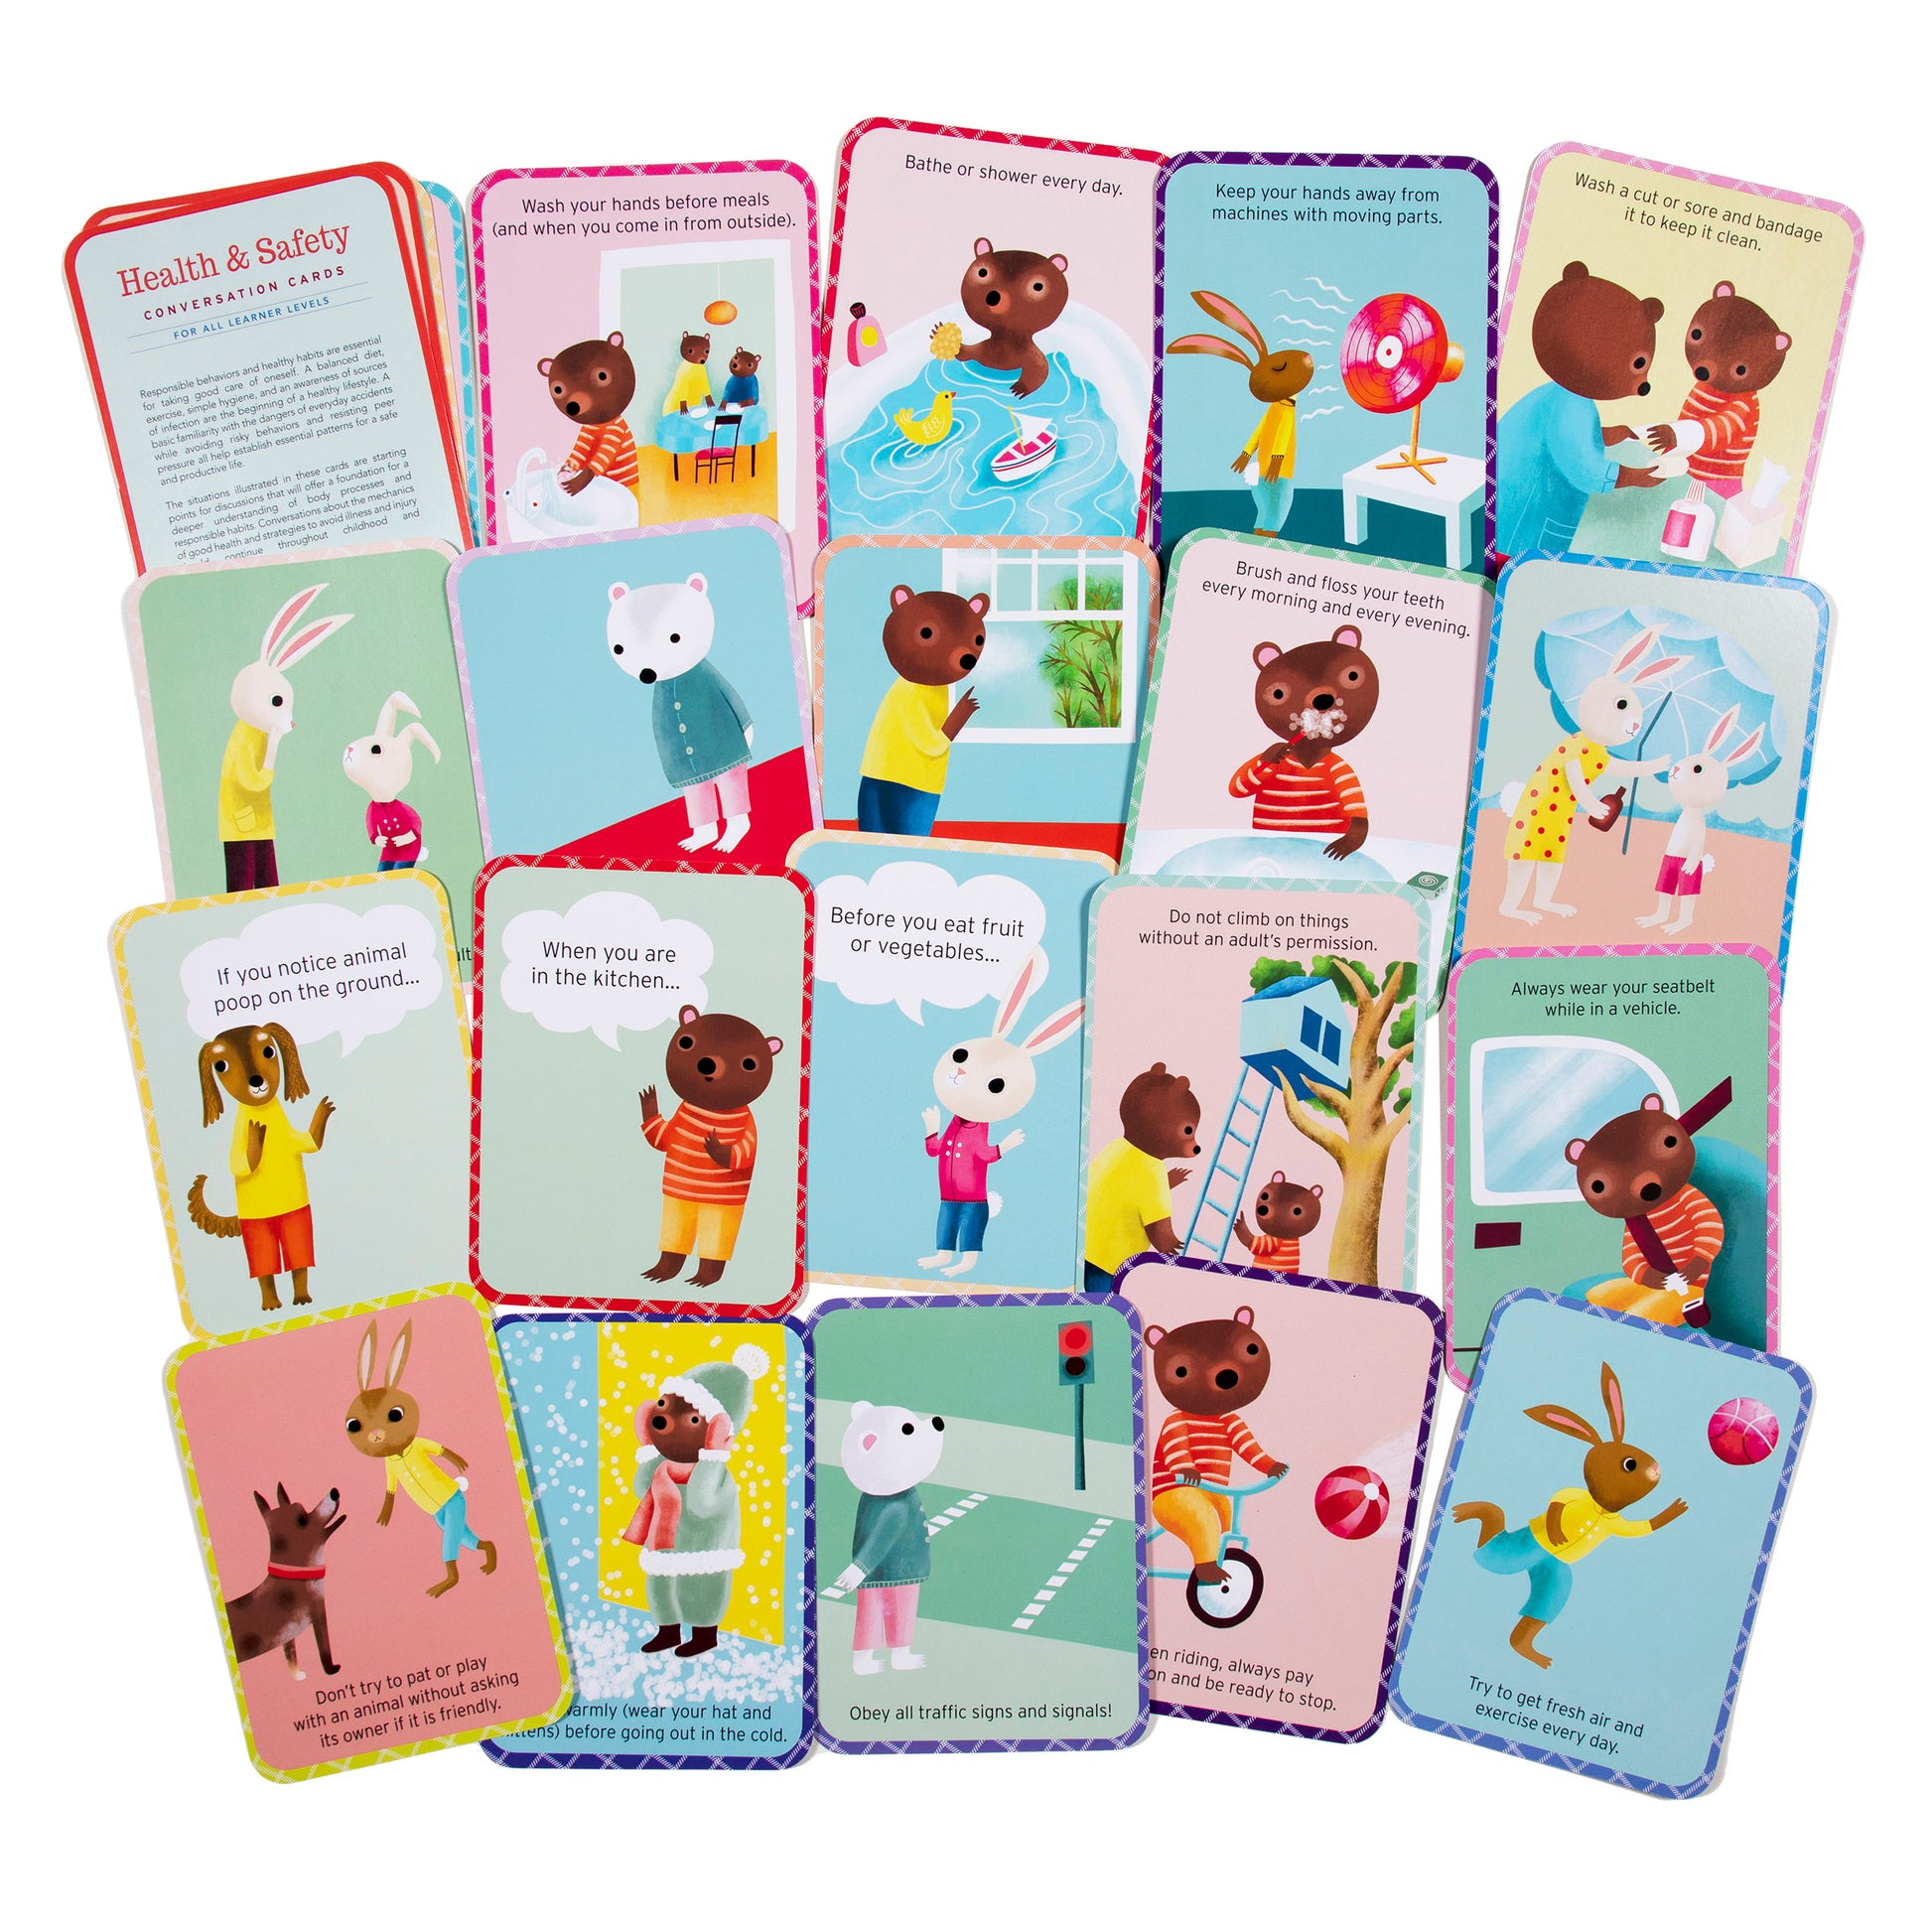 Health & Safety Conversation Flash Cards | eeBoo Educational Gifts for 3+ Teach Kids Wash Your Hands